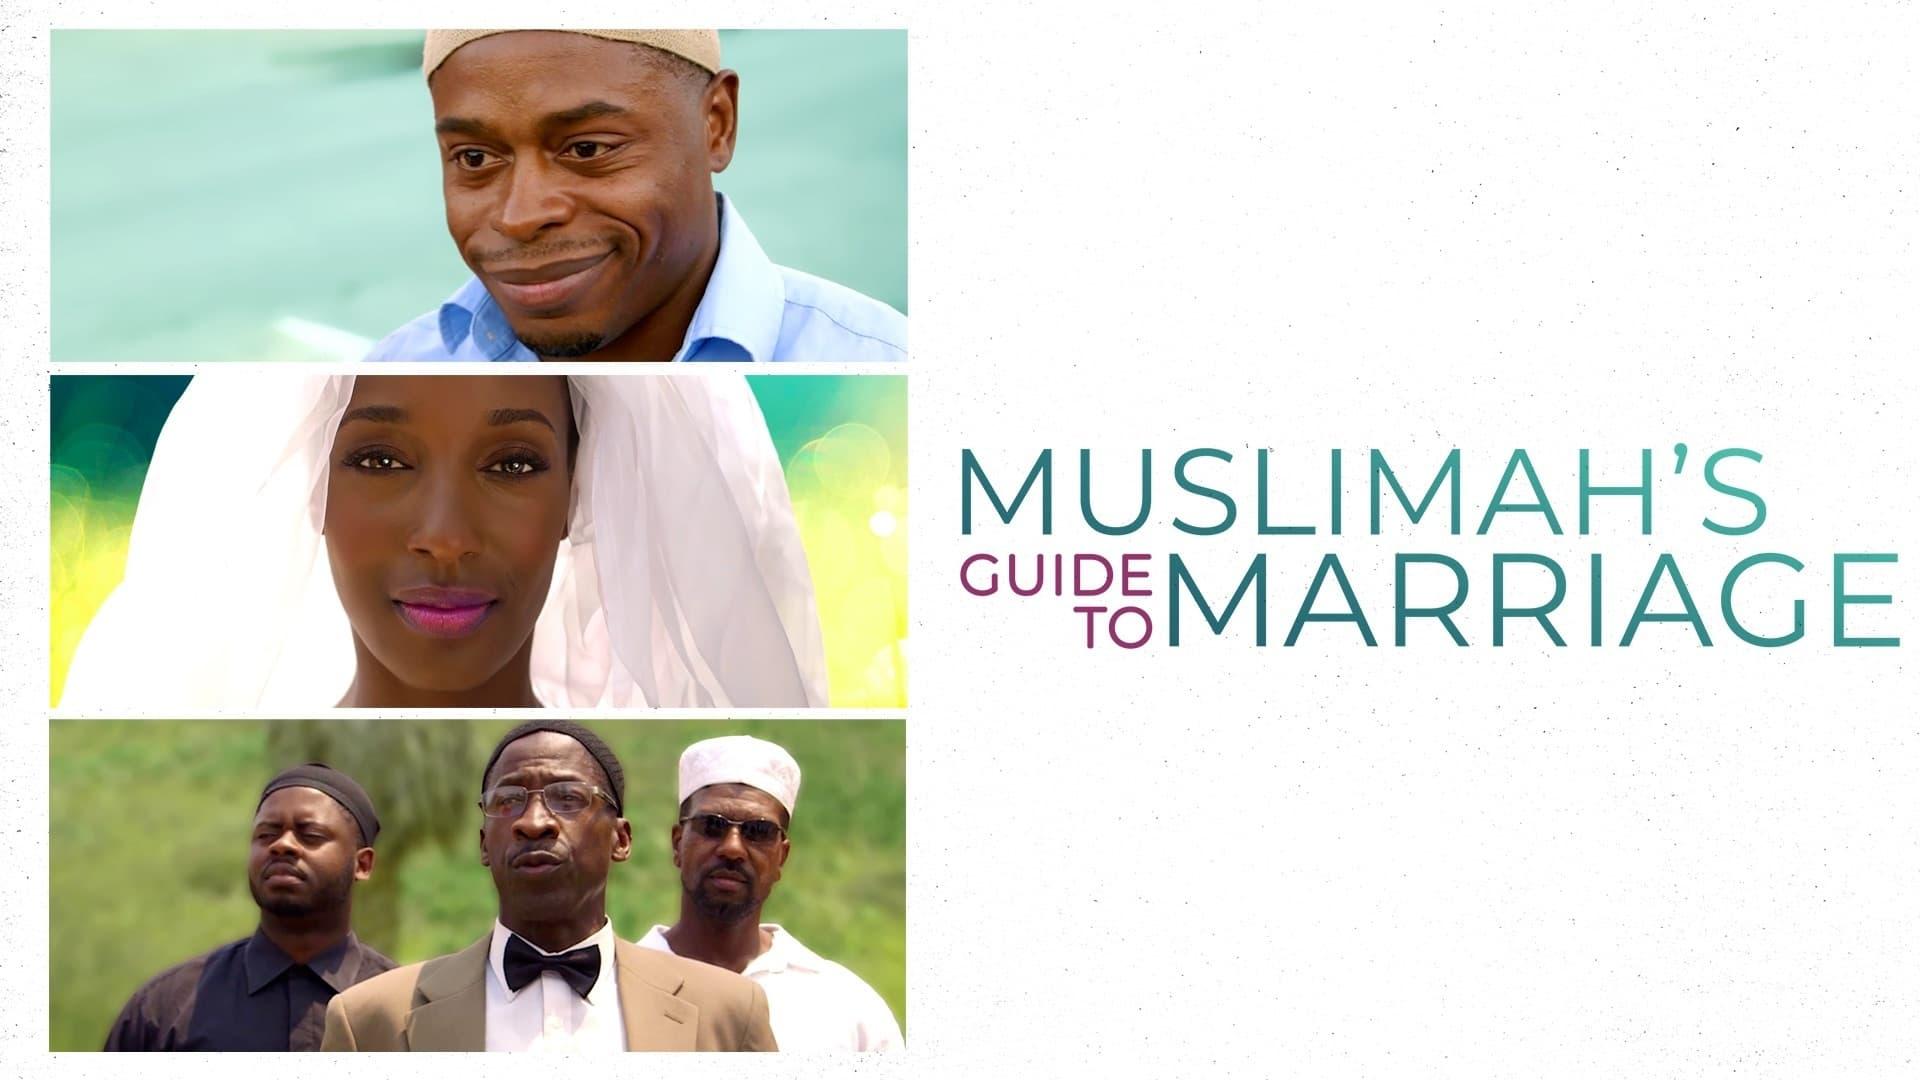 Muslimah's Guide to Marriage backdrop